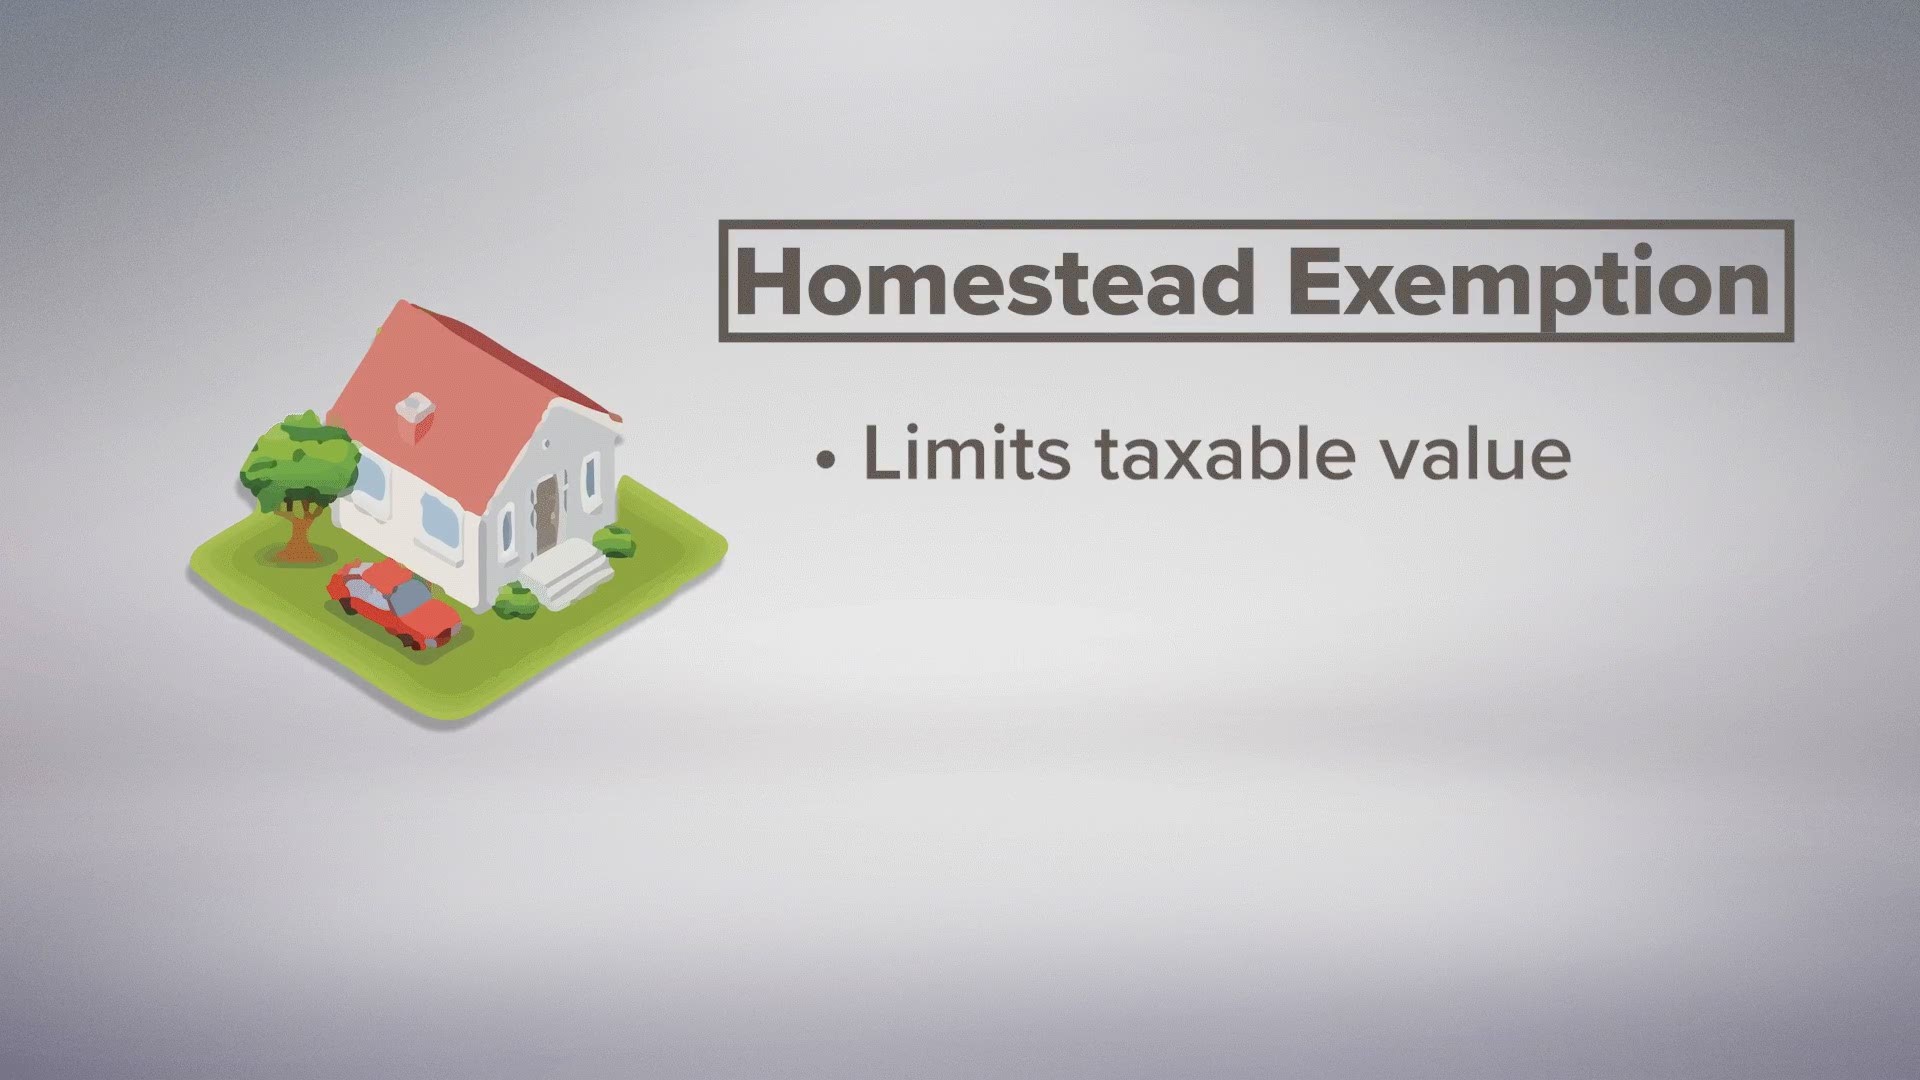 At the expense of others, some are profiting by falsely claiming homestead exemptions on their properties.